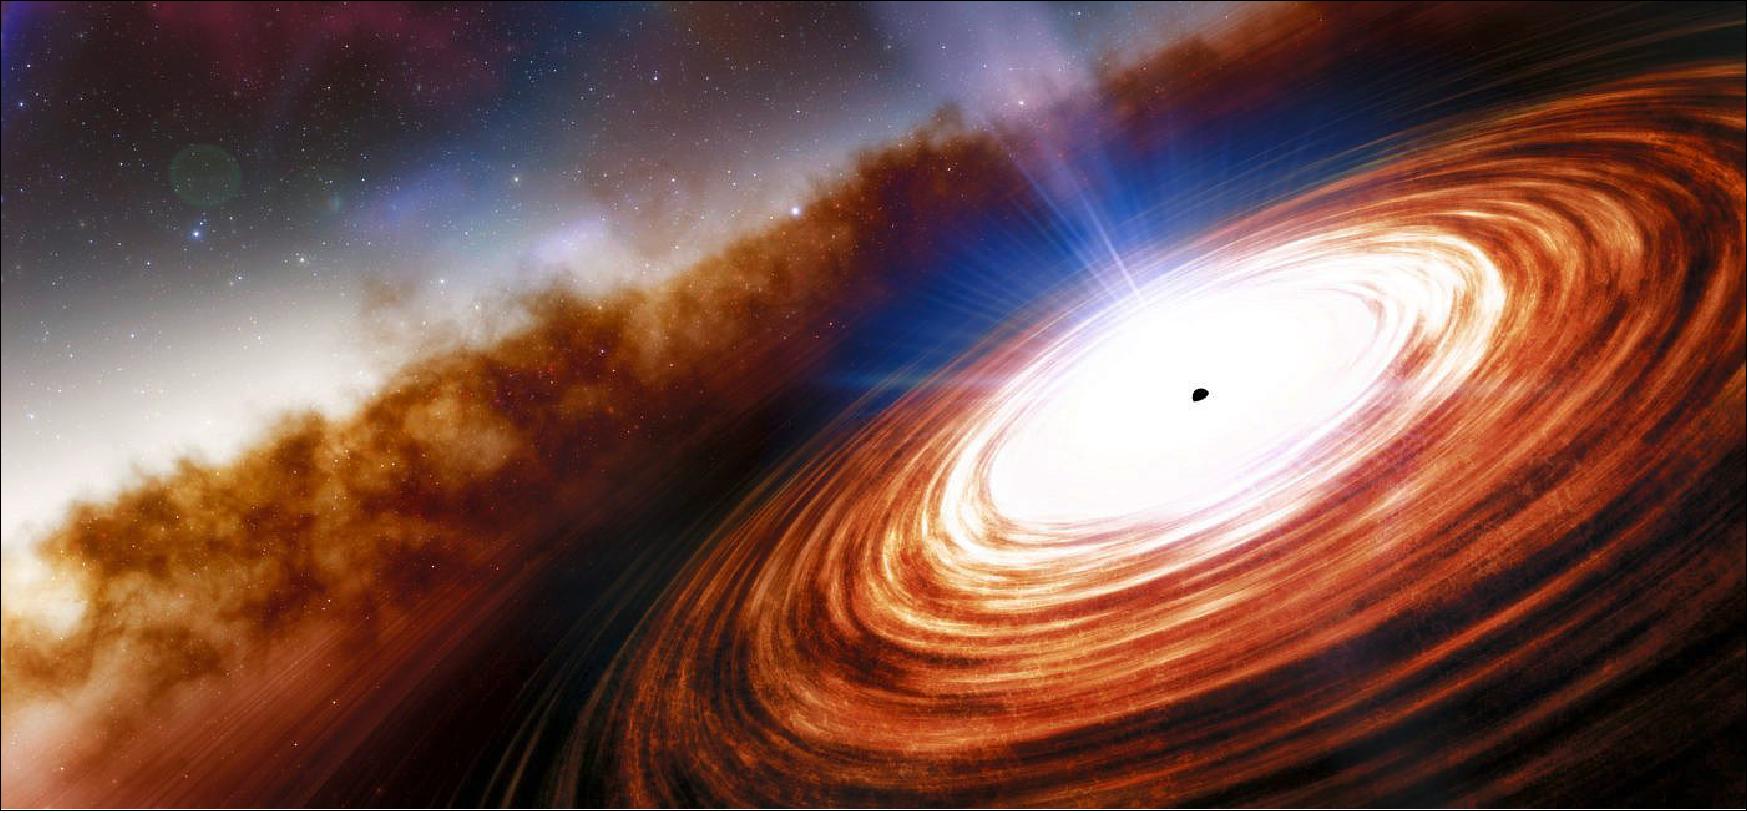 Figure 41: Artist's rendition of the most distant quasar found. The new discovery beats the previous distance record for a quasar set three years ago. Observations with the Atacama Large Millimeter/submillimeter Array (ALMA) in Chile confirmed the distance measurement to high precision (image credit: NOIRLab/NSF/AURA/J. da Silva)